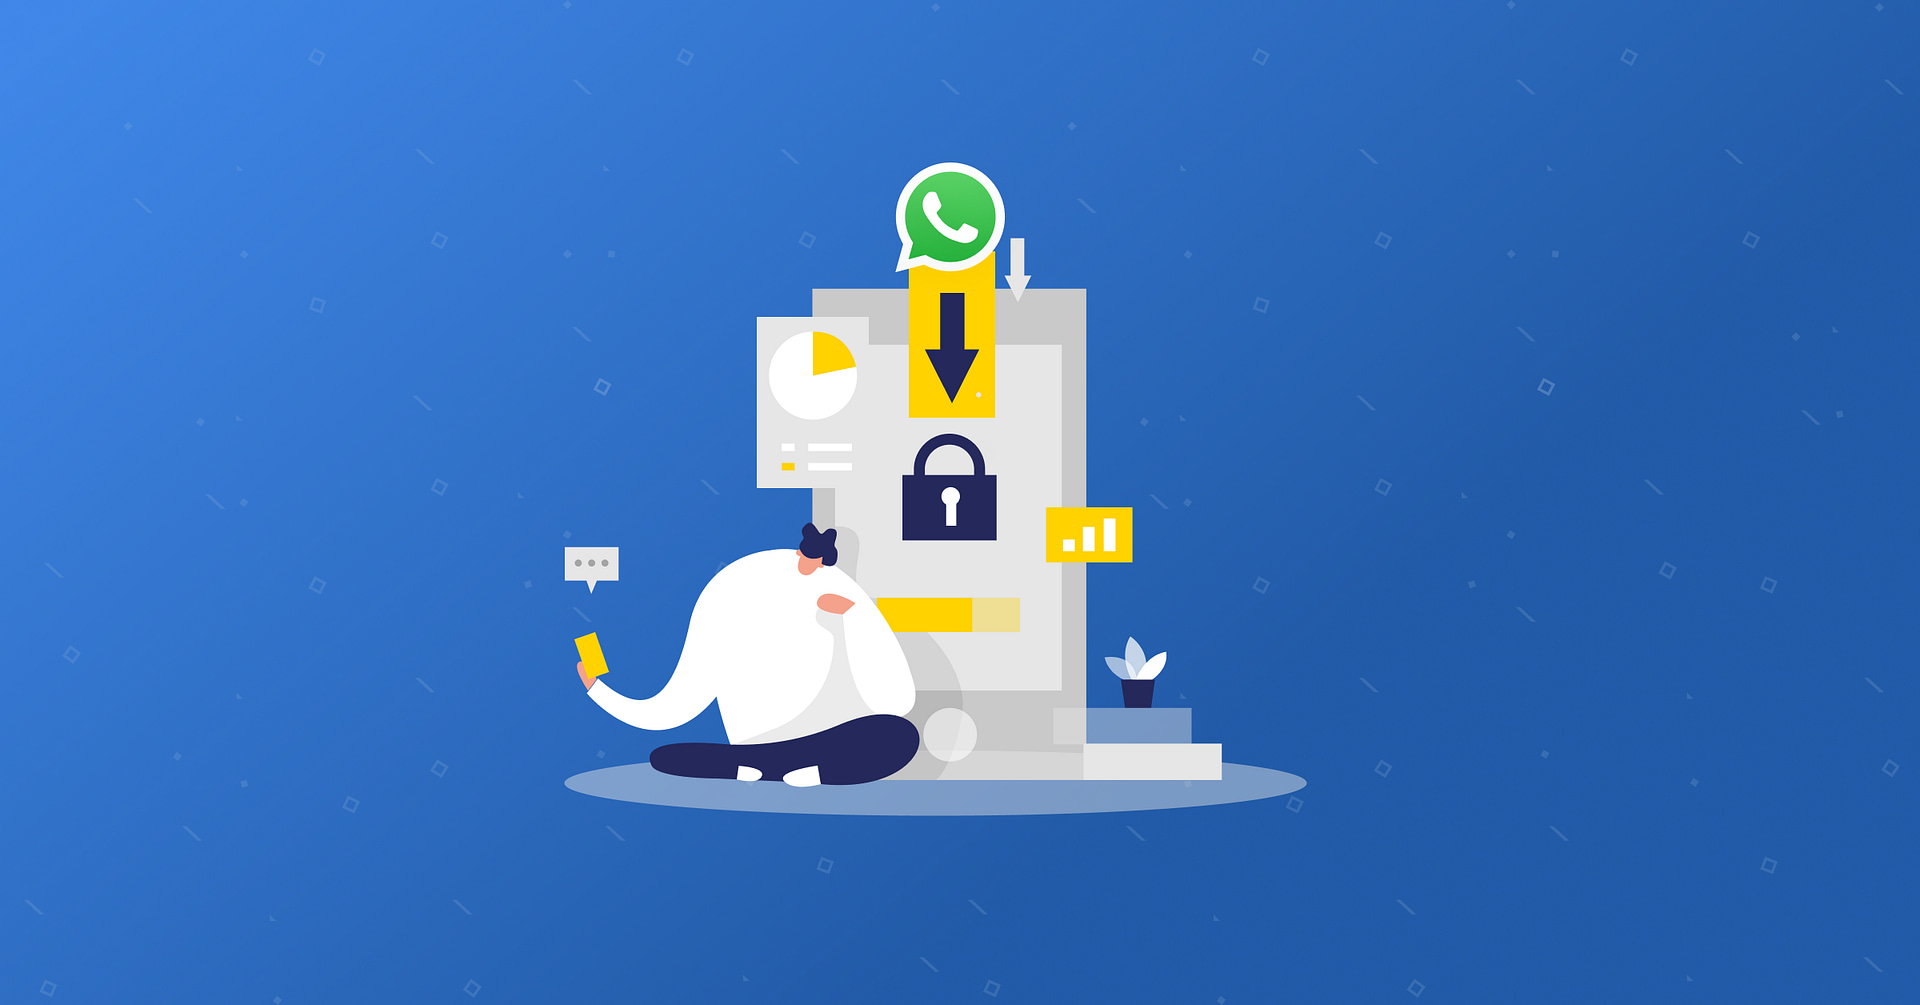 When and how to transition clients from Whatsapp to a secure chat?